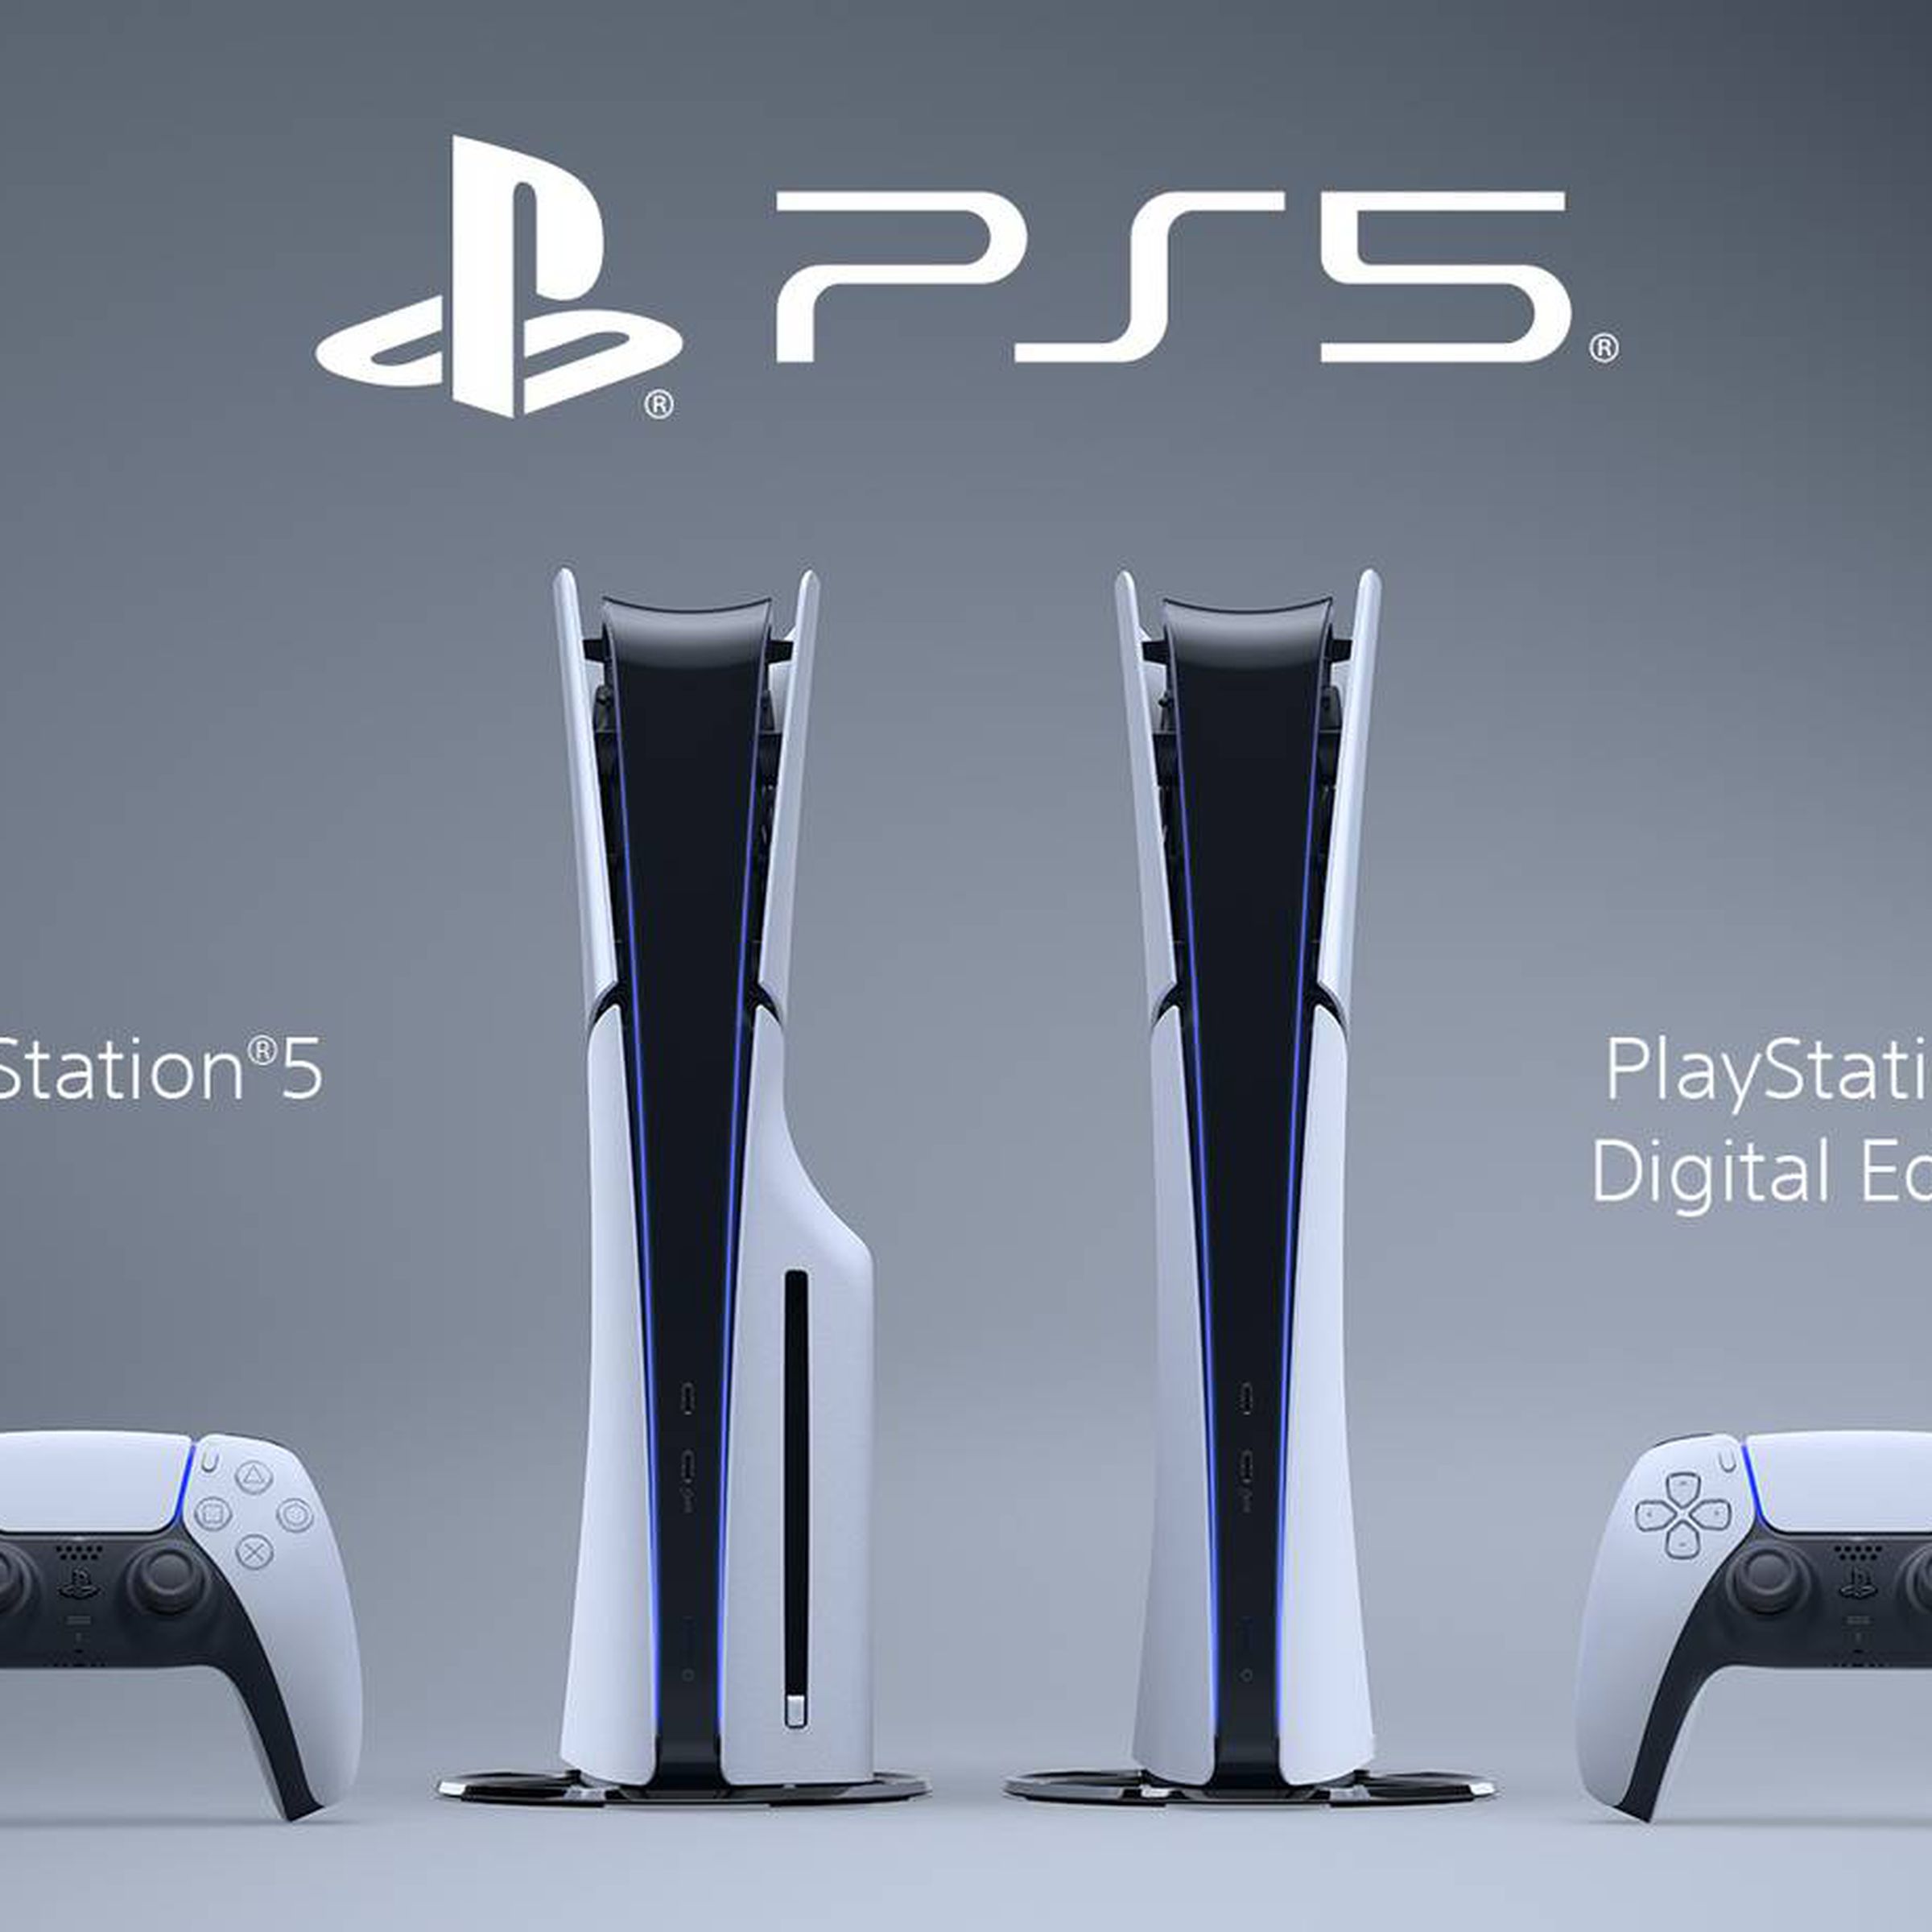 An image of the new PS5 models.